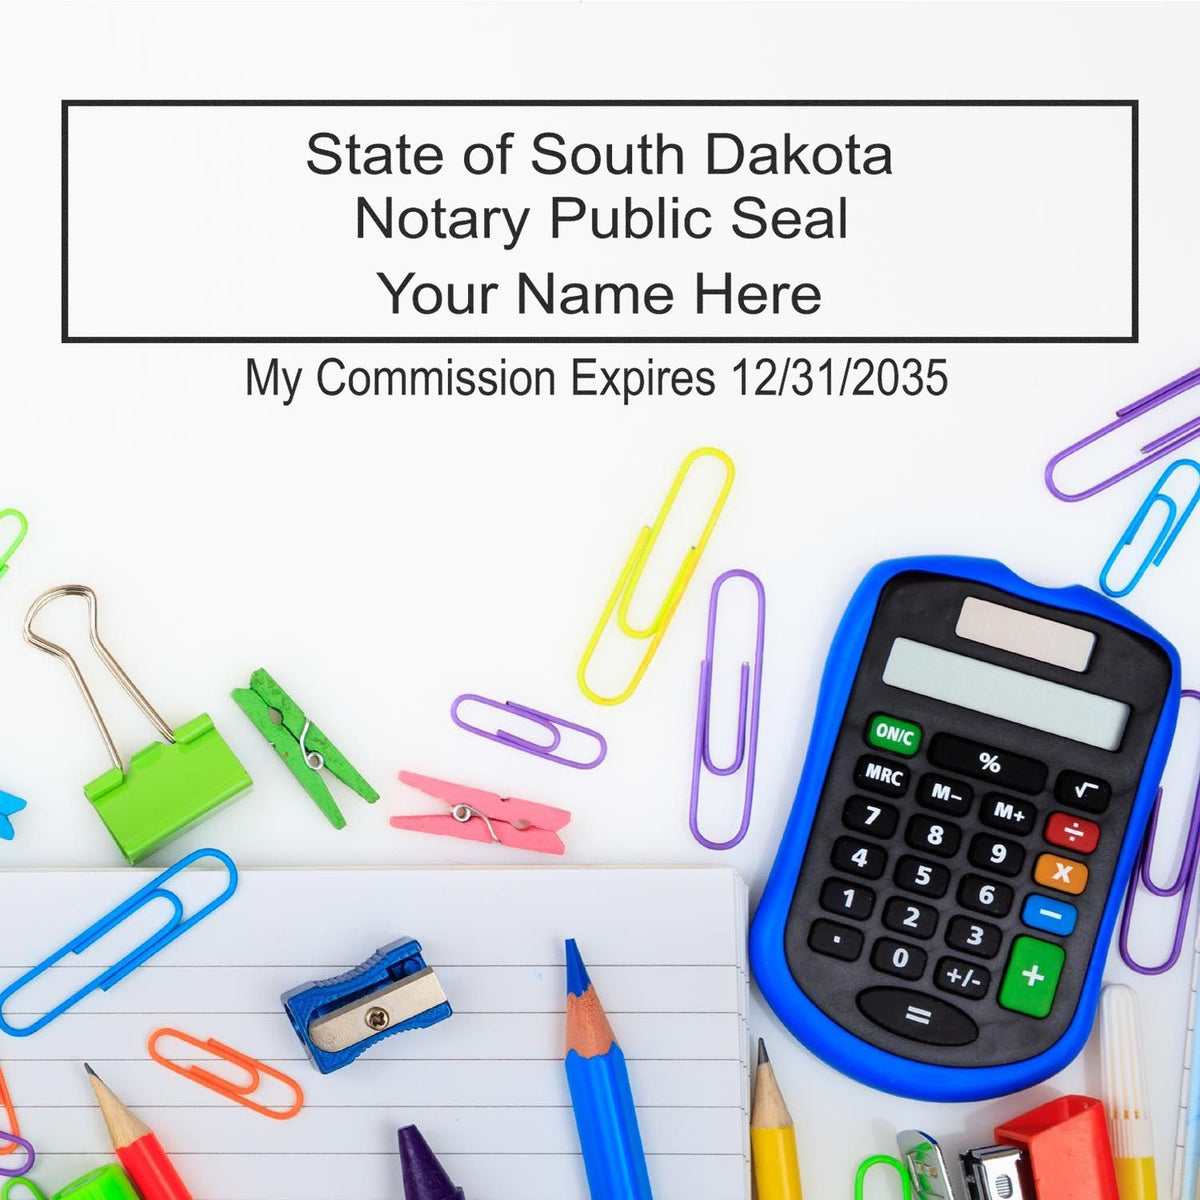 Another Example of a stamped impression of the Heavy-Duty South Dakota Rectangular Notary Stamp on a piece of office paper.